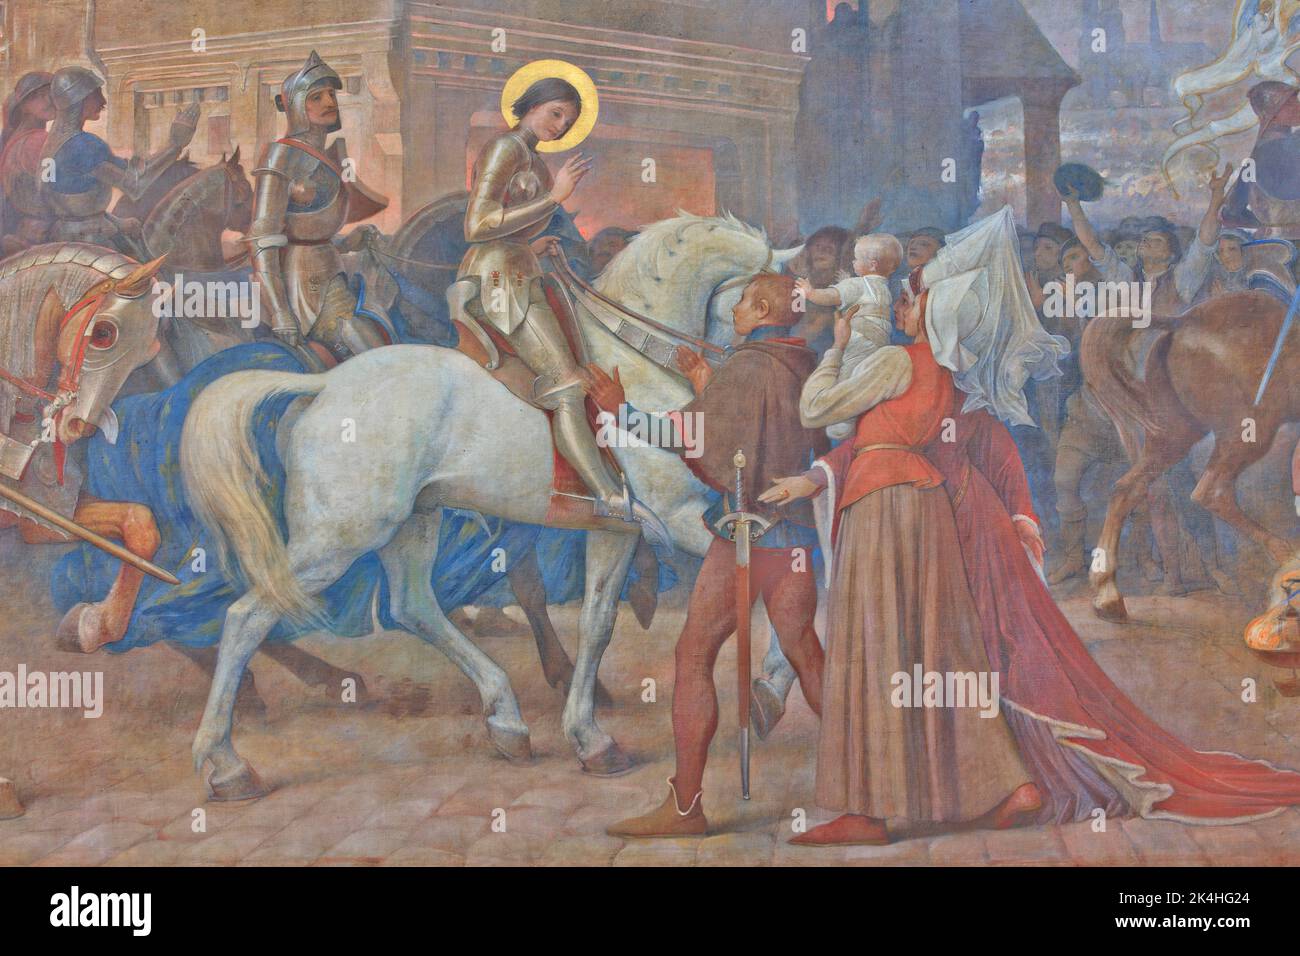 Joan of Arc (1412-1431), defender of the French nation, on a mural painting at the basilica of Bois-Chenu in Domrémy-la-Pucelle (Vosges), France Stock Photo